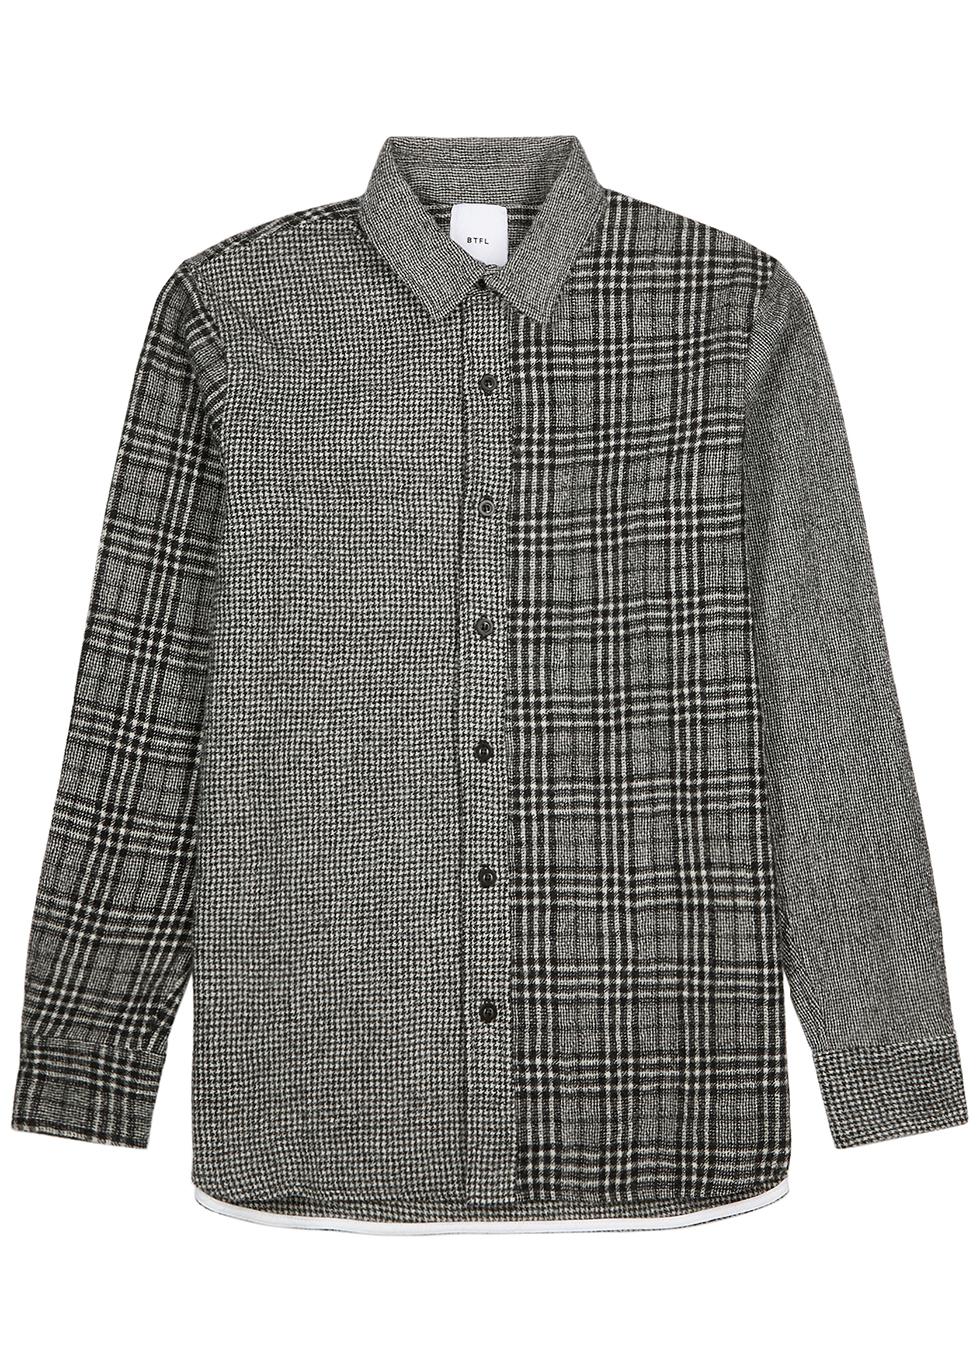 Panelled flannel shirt by BTFL